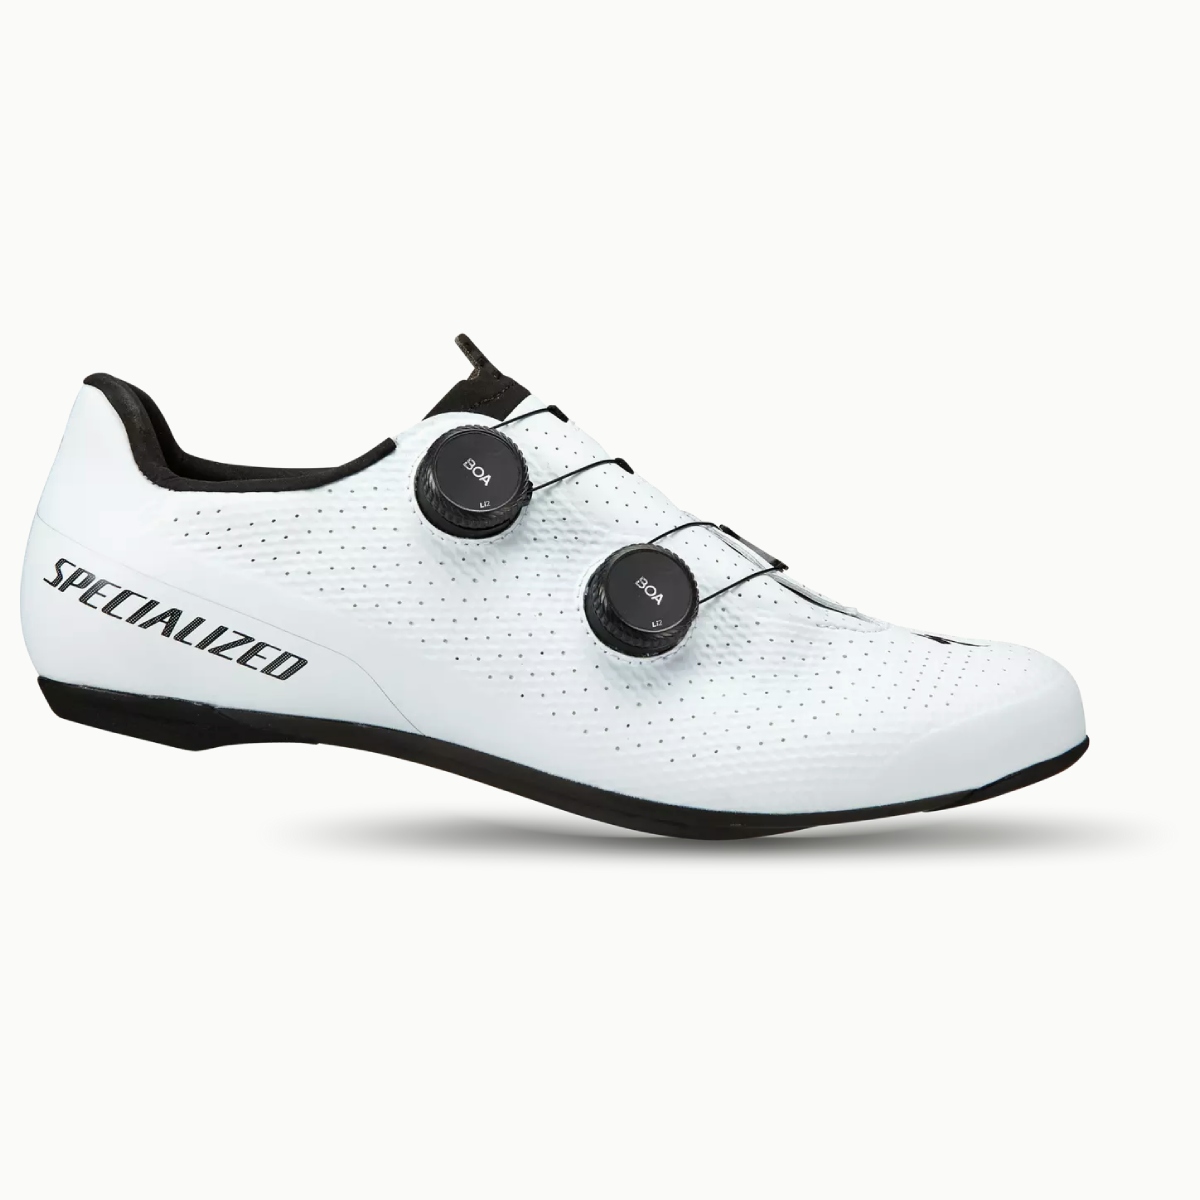 Specialized Torch 3.0 Shoes 